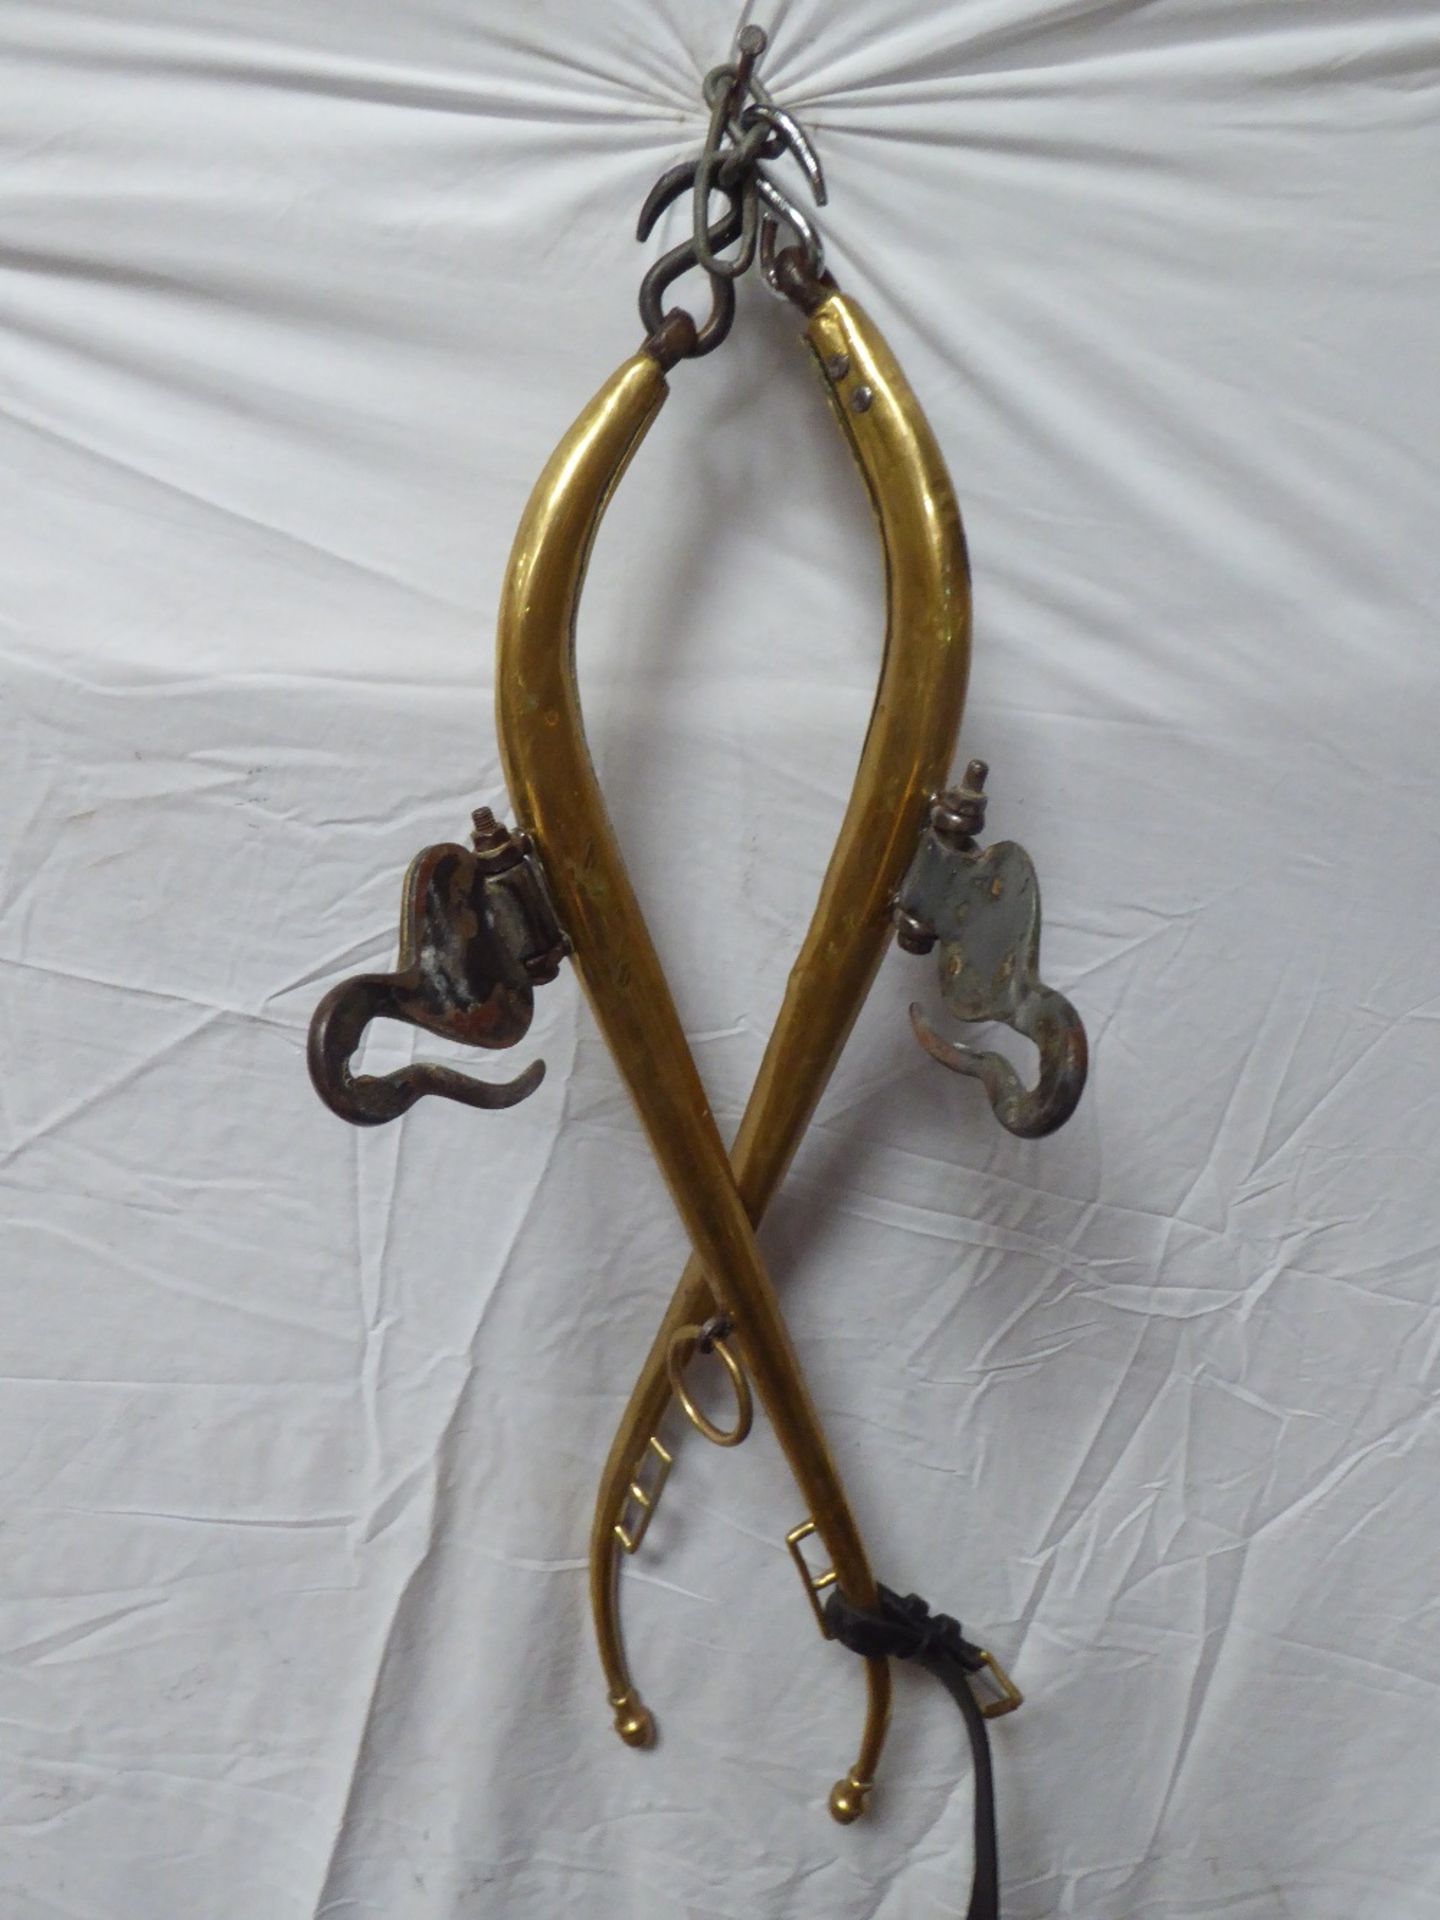 Pair of solid brass hames with leather straps and acorn tops